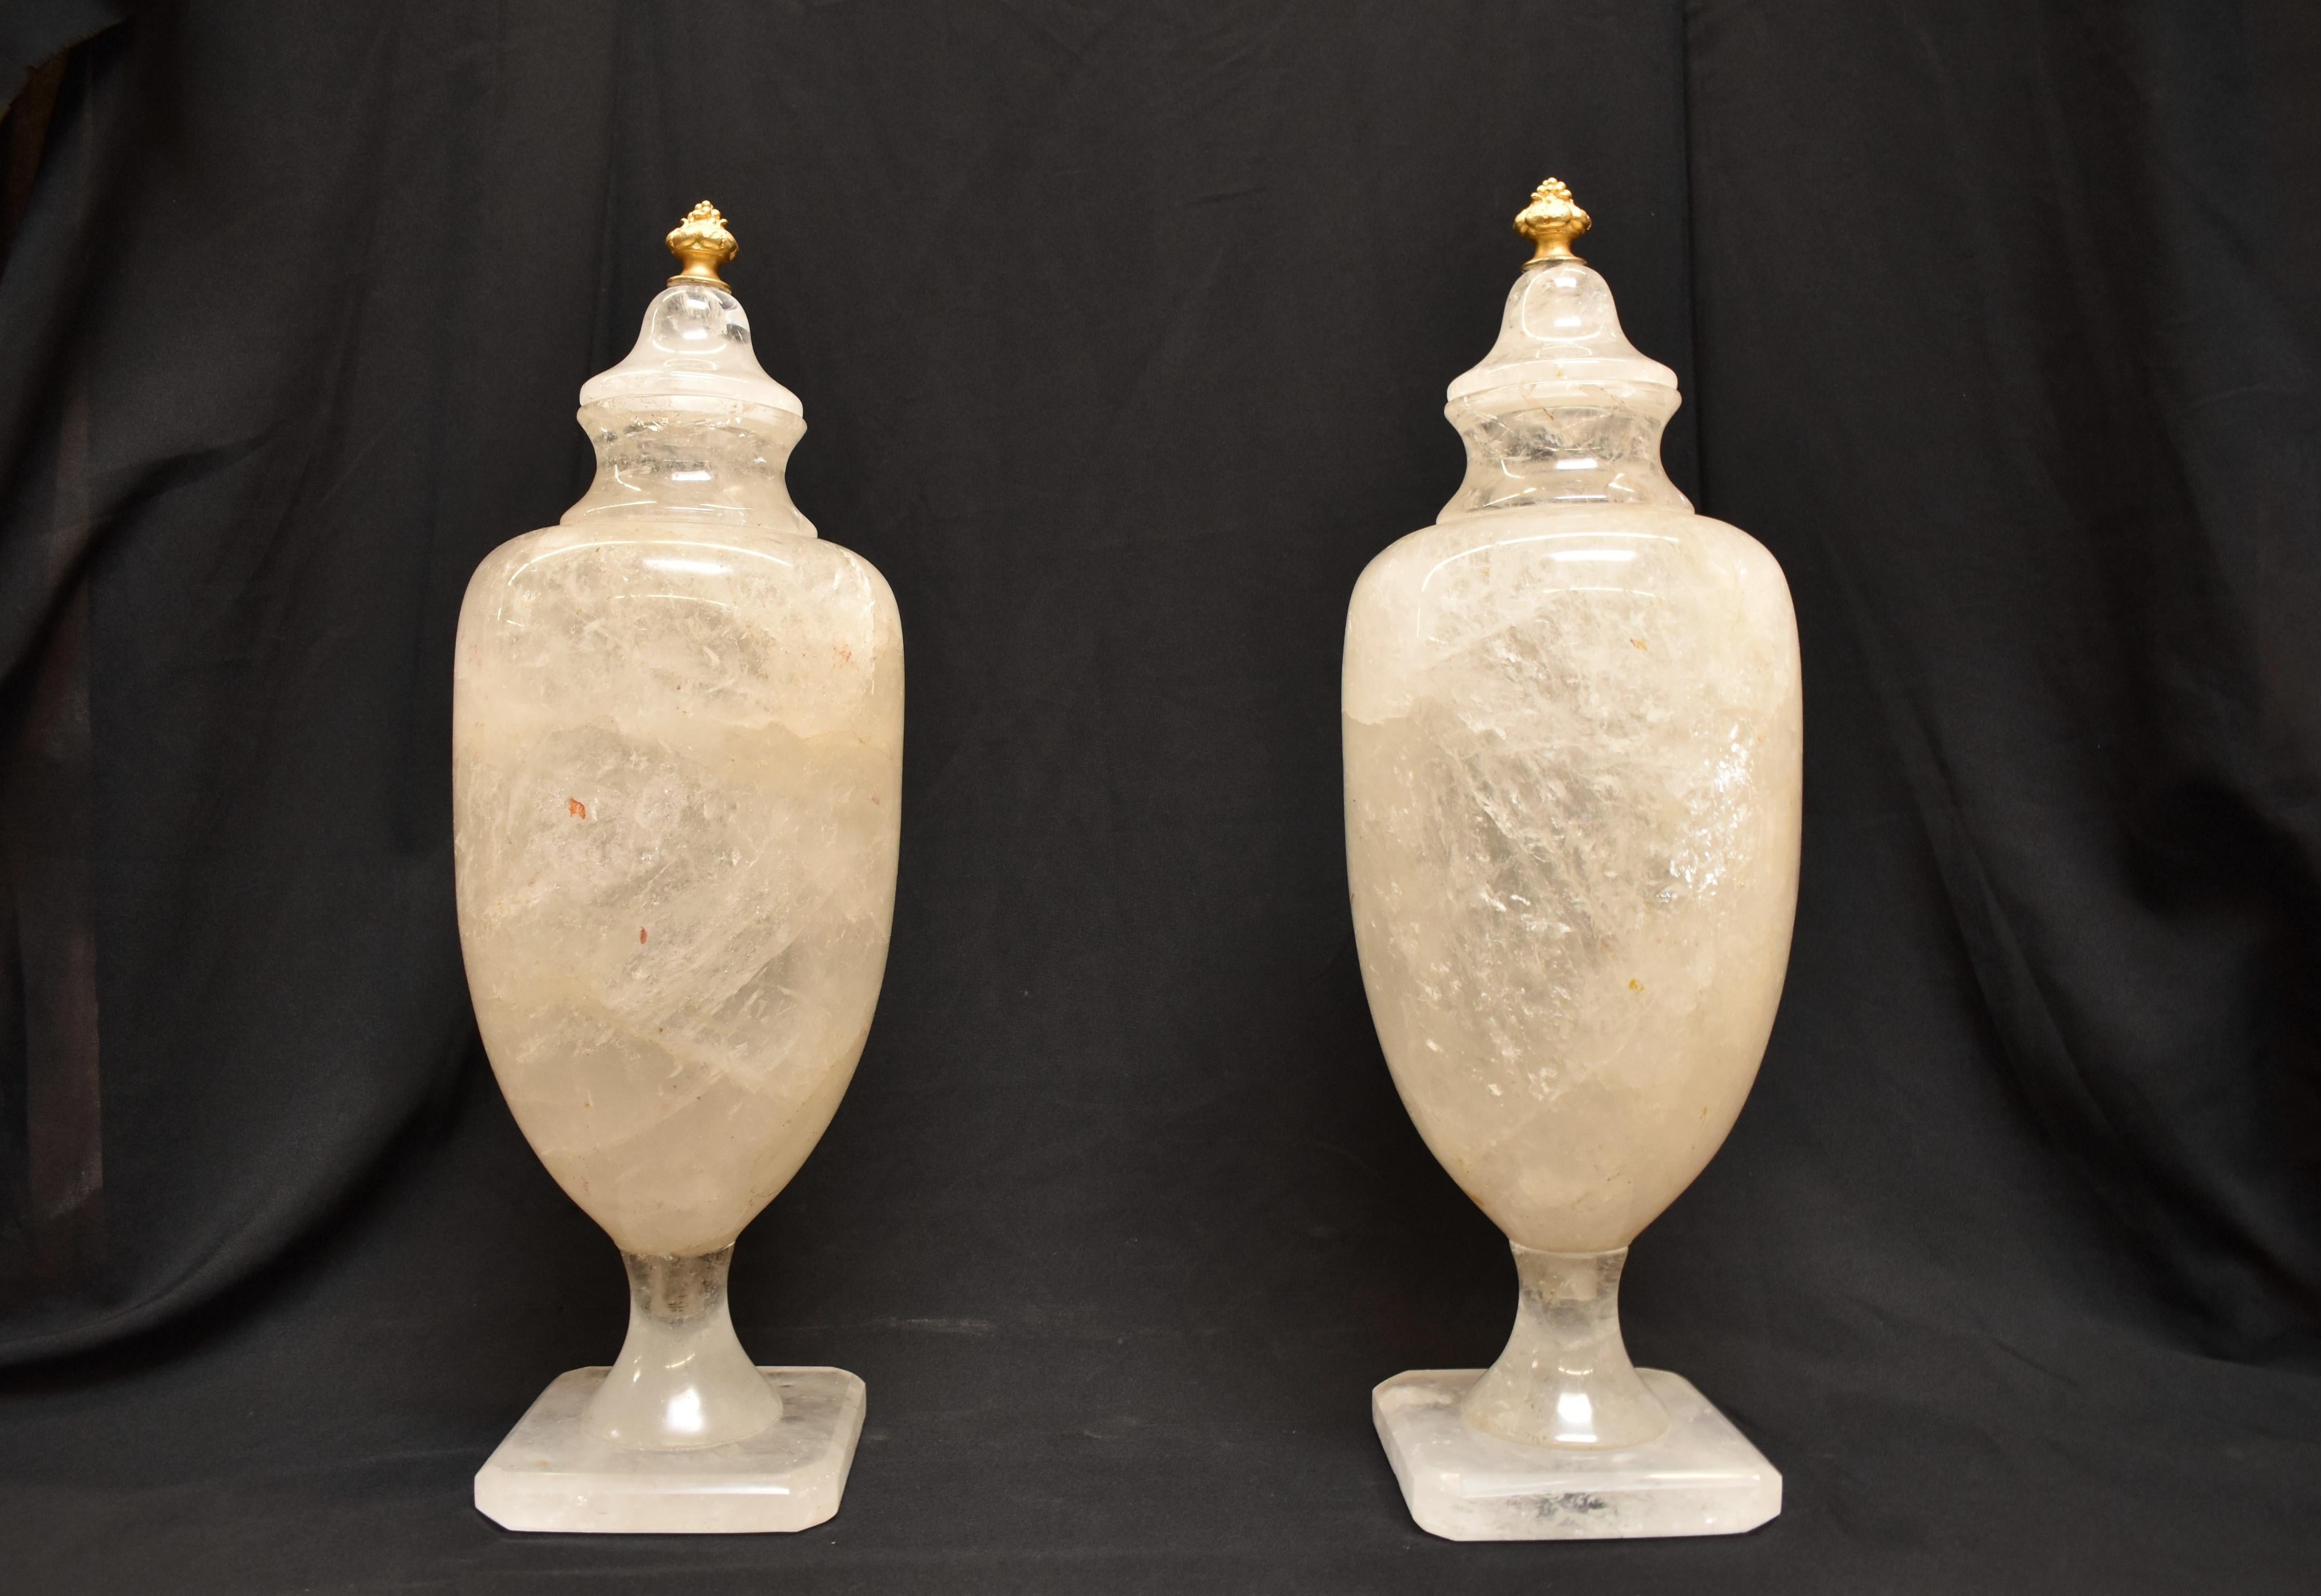 20th Century Pair of Rock Crystal Urns with Gold Finials